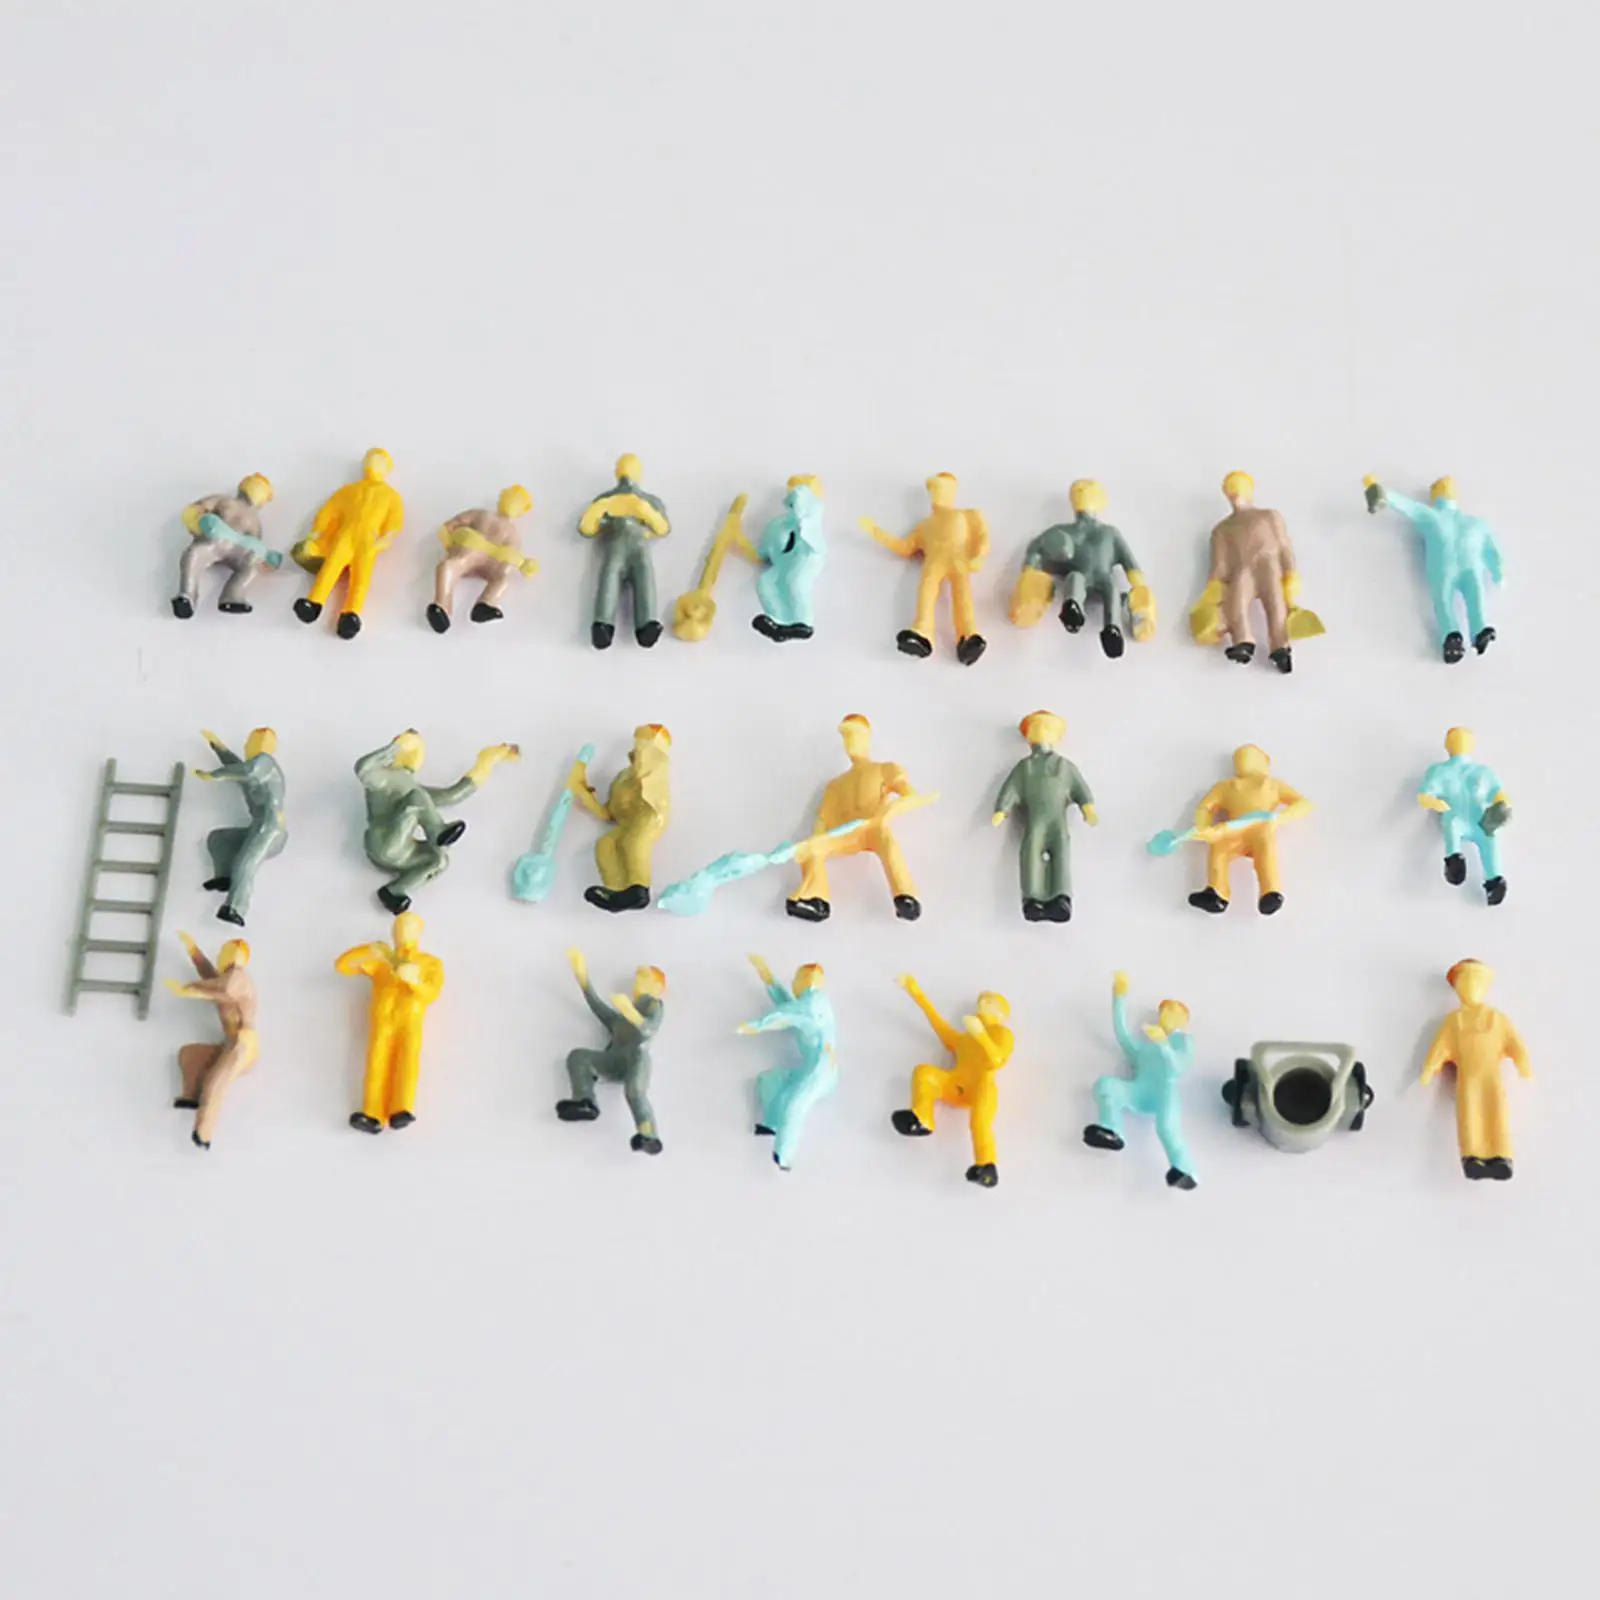 25x 1/87 Mini Railroad Worker Figure with Tools Building Toys HO Gauge Sand Table Scene Hand Painted Figurines Supplies Decor